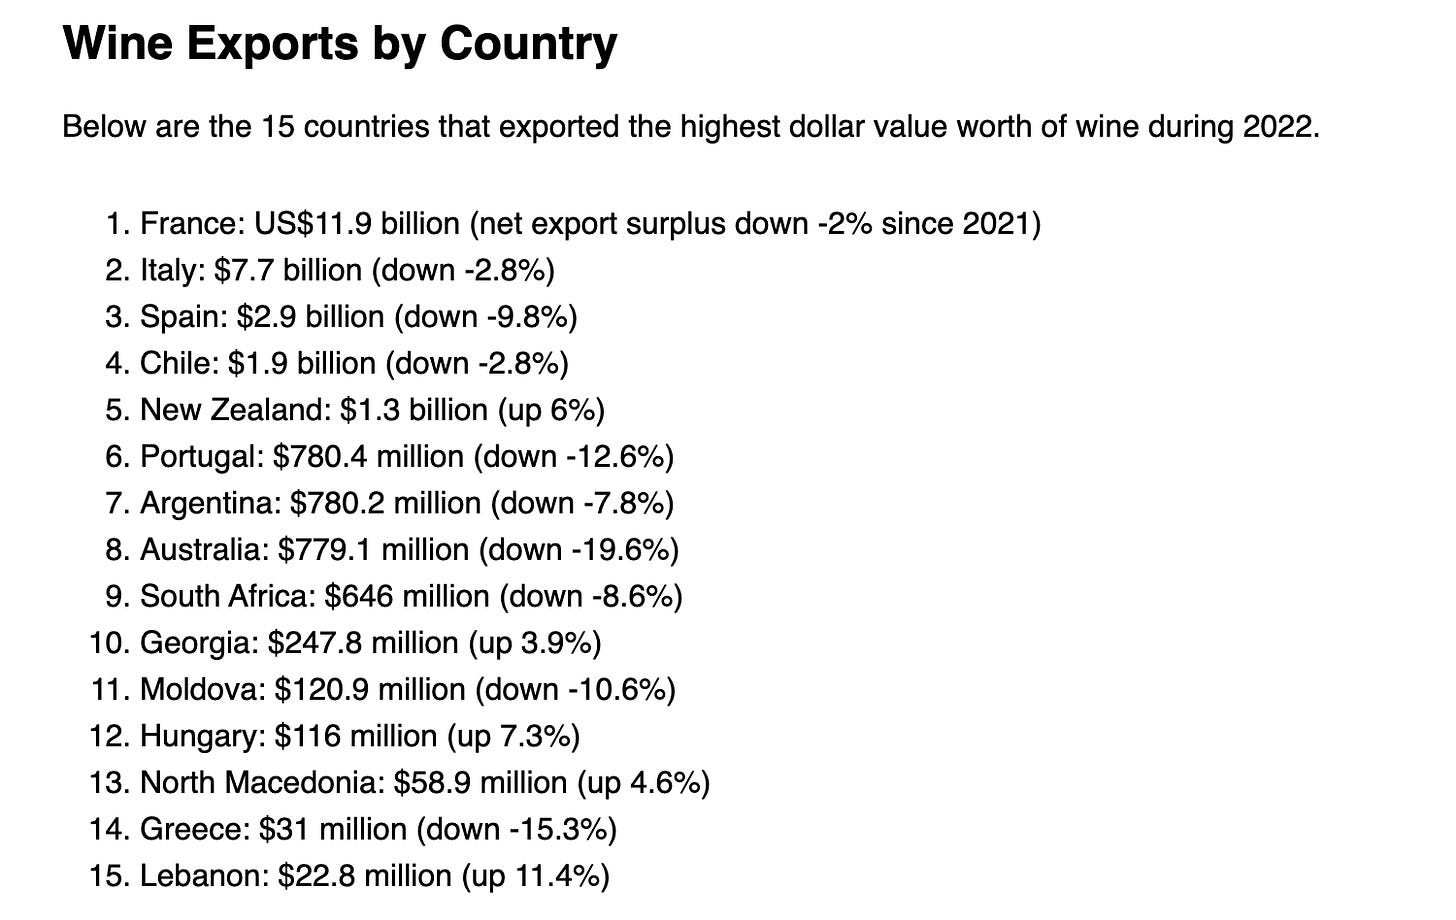 Wine Exports by Country in 2022